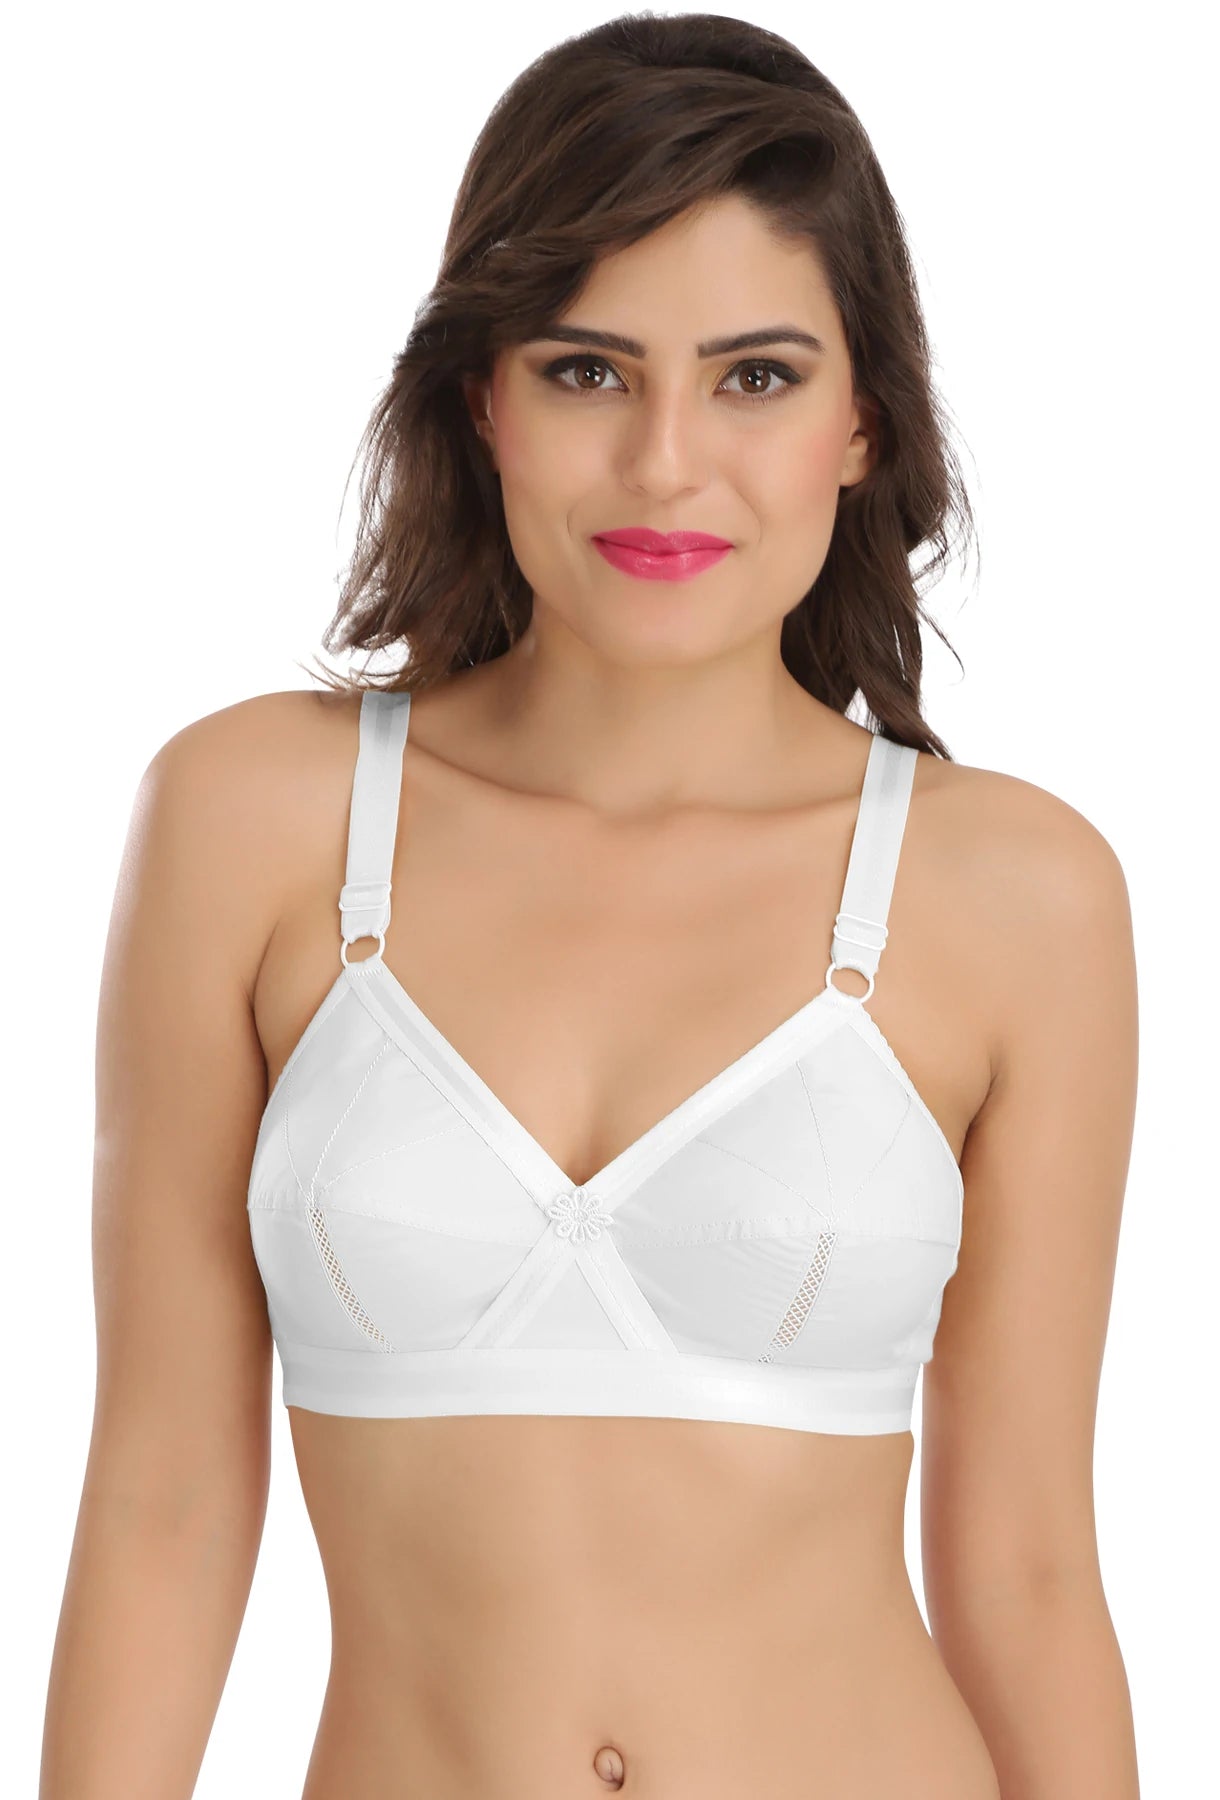 Trylo FRONT OPEN-SCARLET-38-D-CUP Women Everyday Non Padded Bra